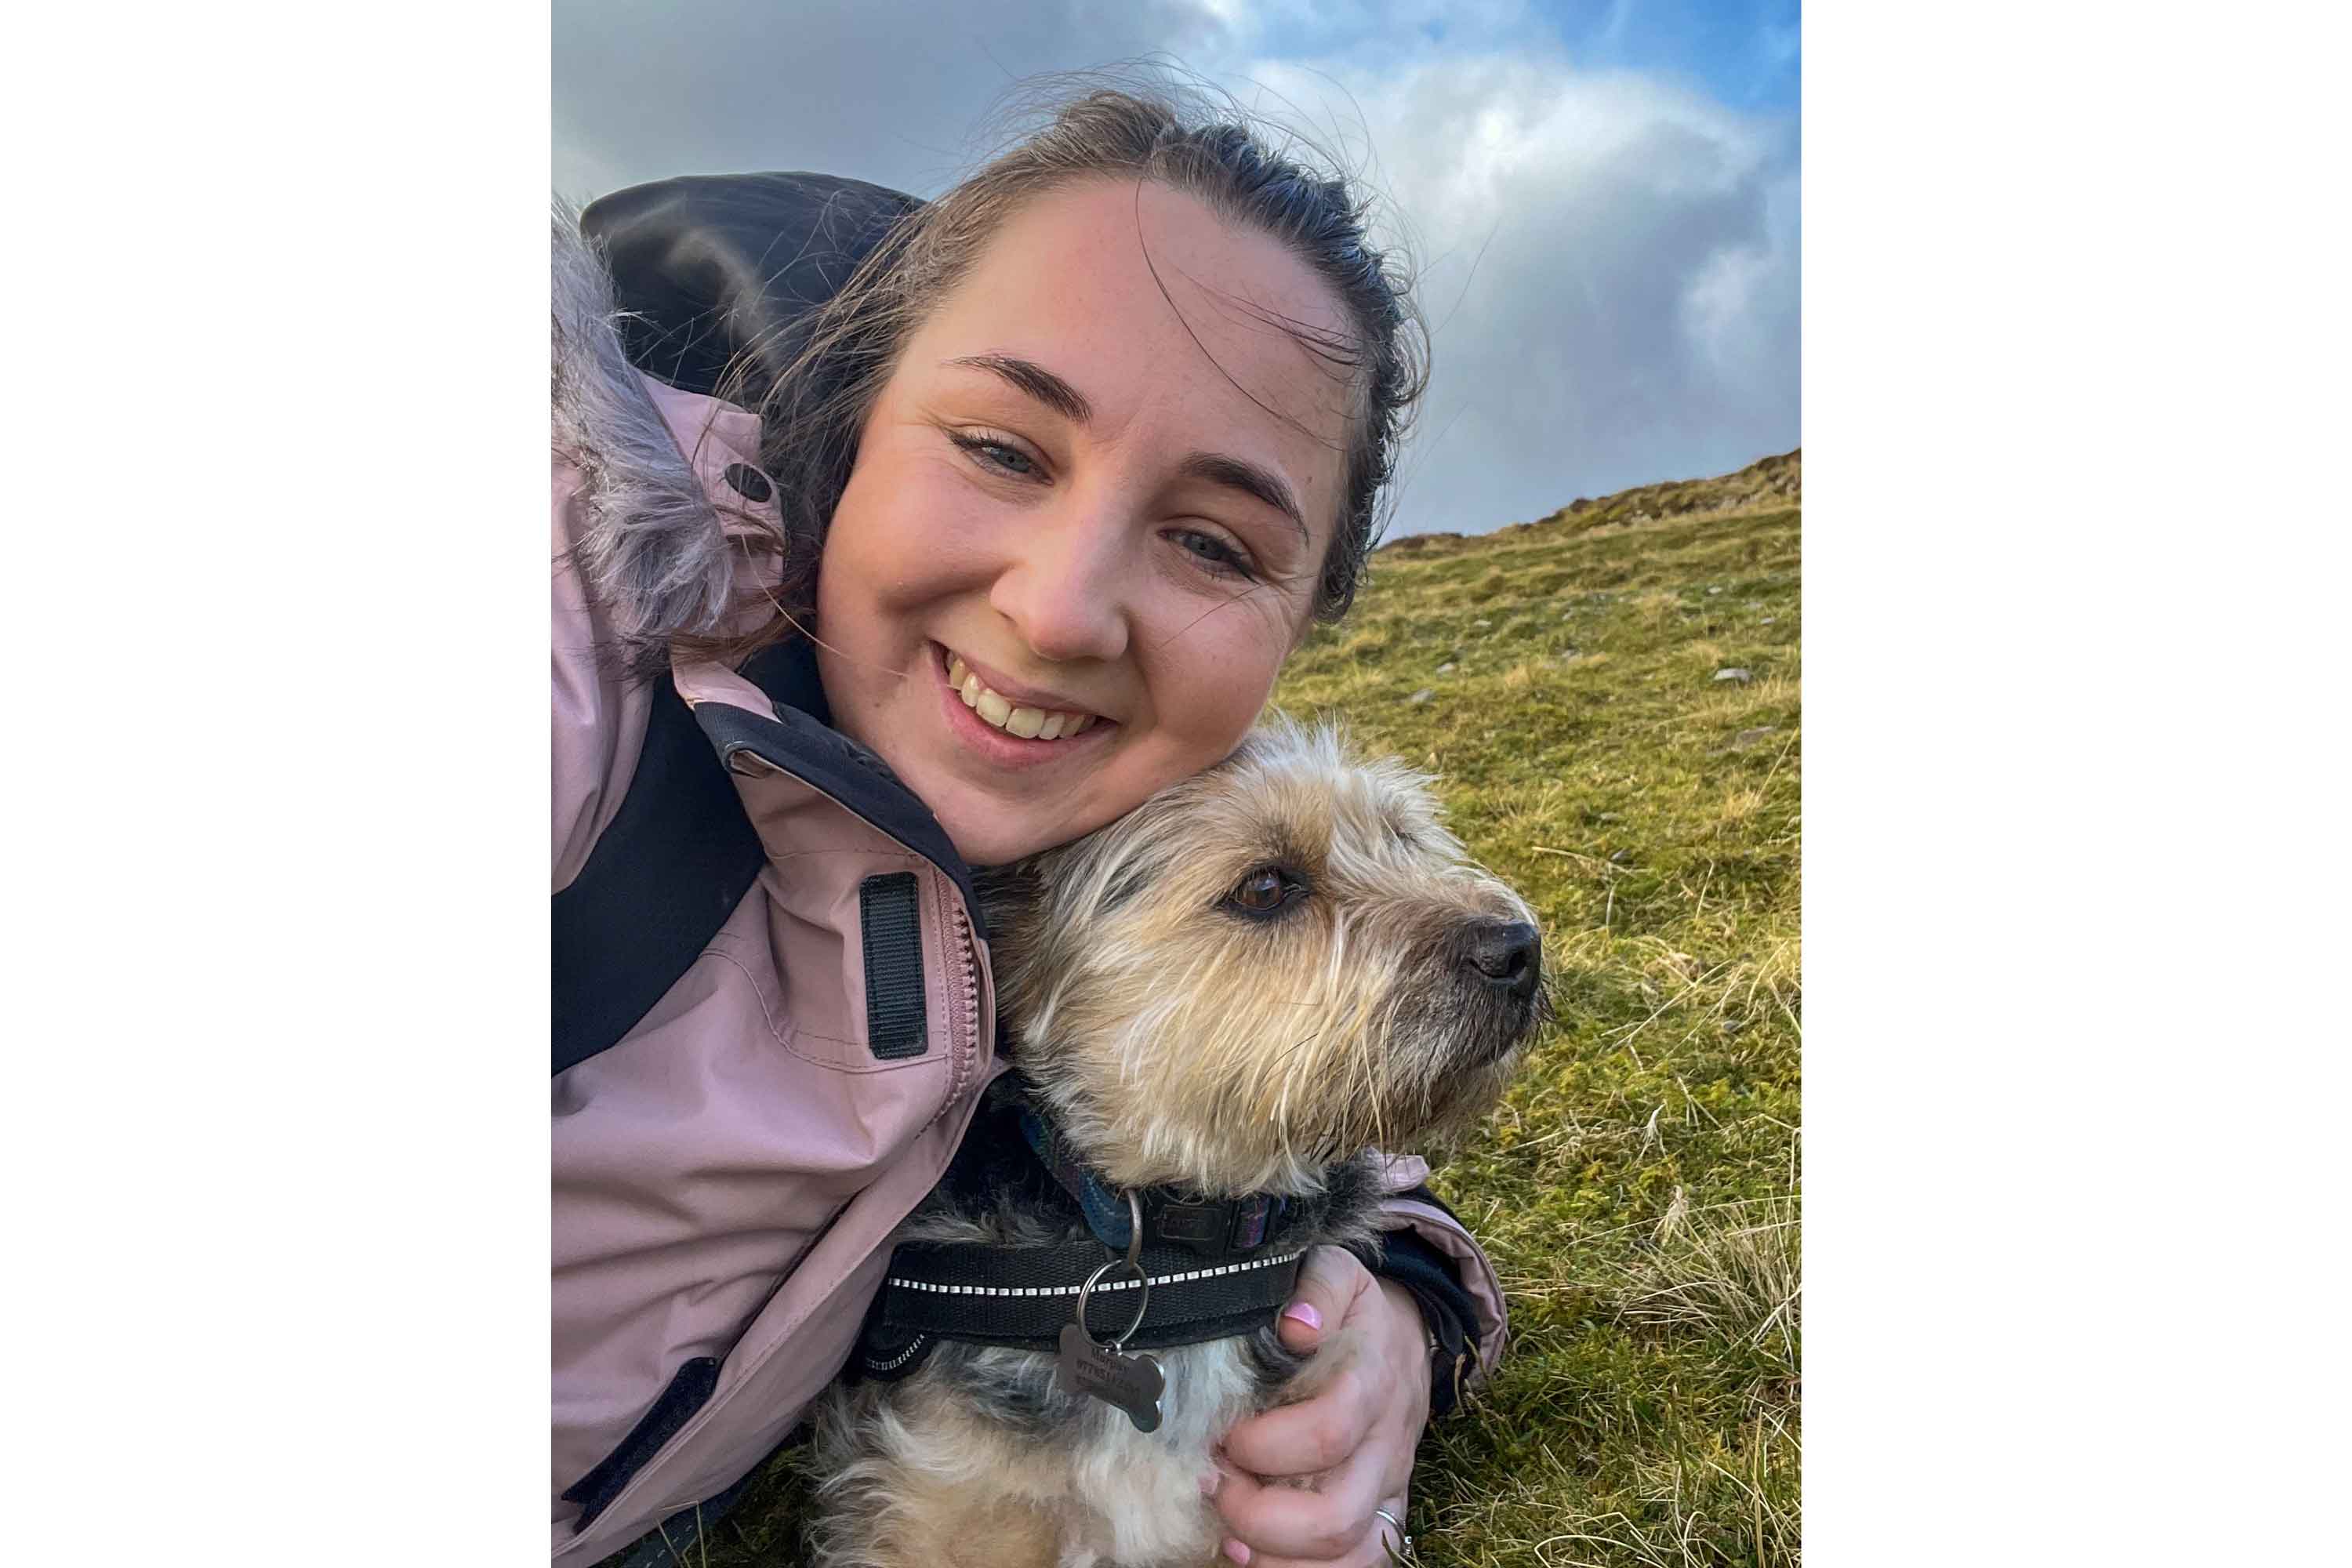 Emily and her dog Murphy taking a selfie on a windswept hill